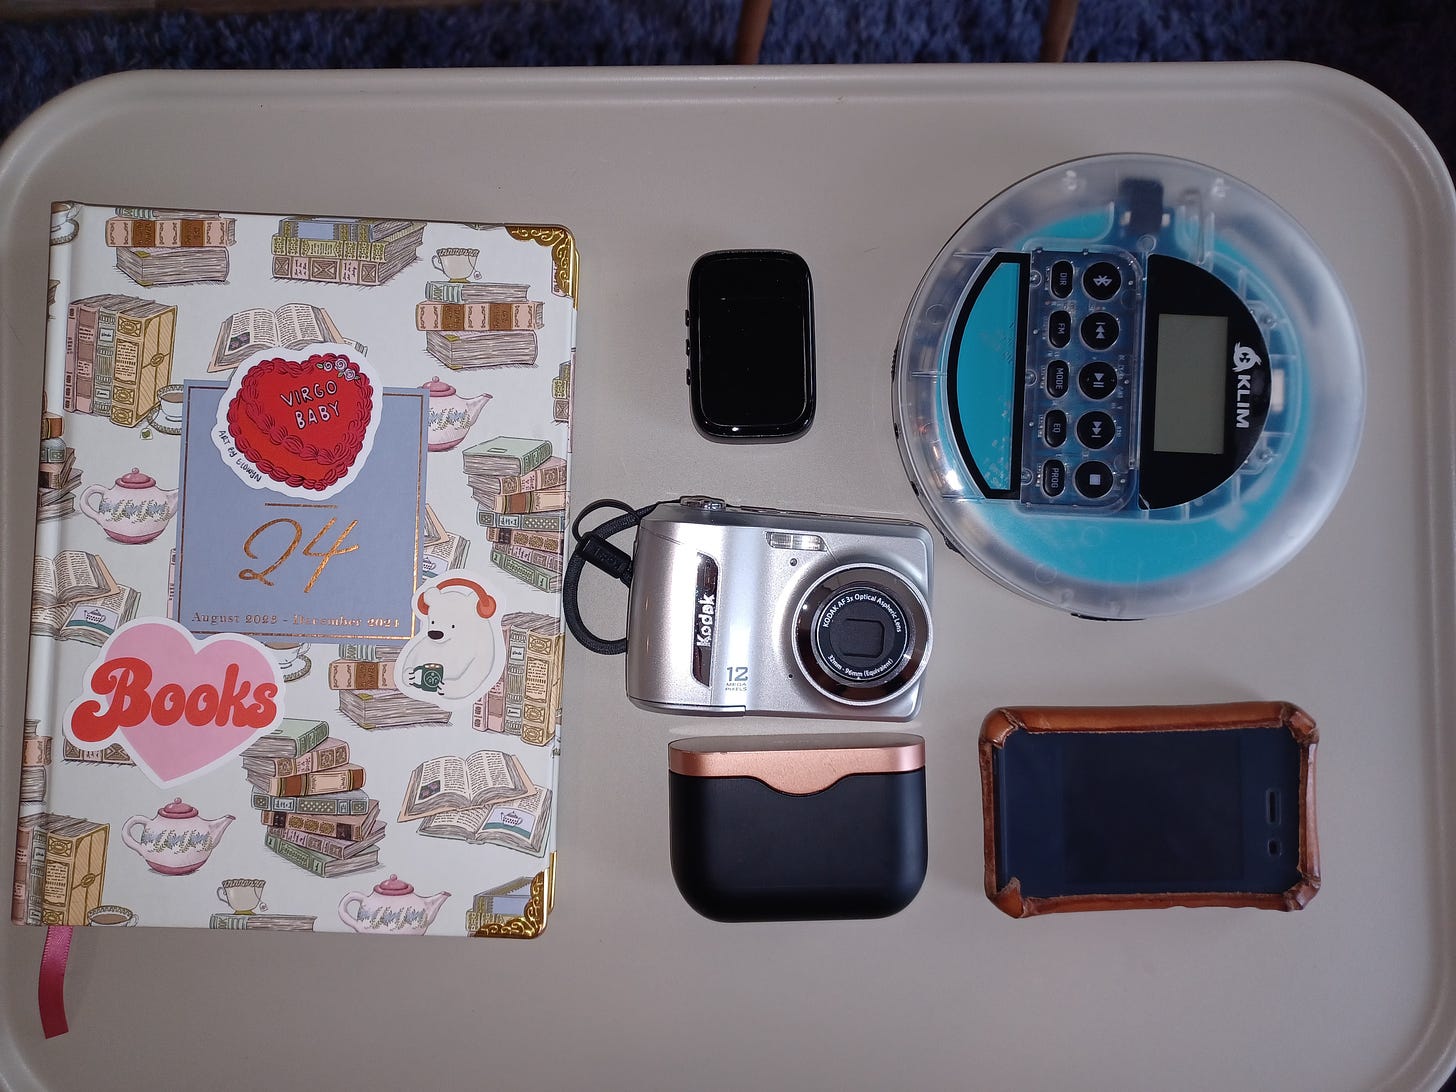 A picture of a hardbound paper planner, a digital Kodak Easyshot camera, bluetooth headphones, a Light Phone 2 in a case, a small mp3 player, and a Klim CD player.